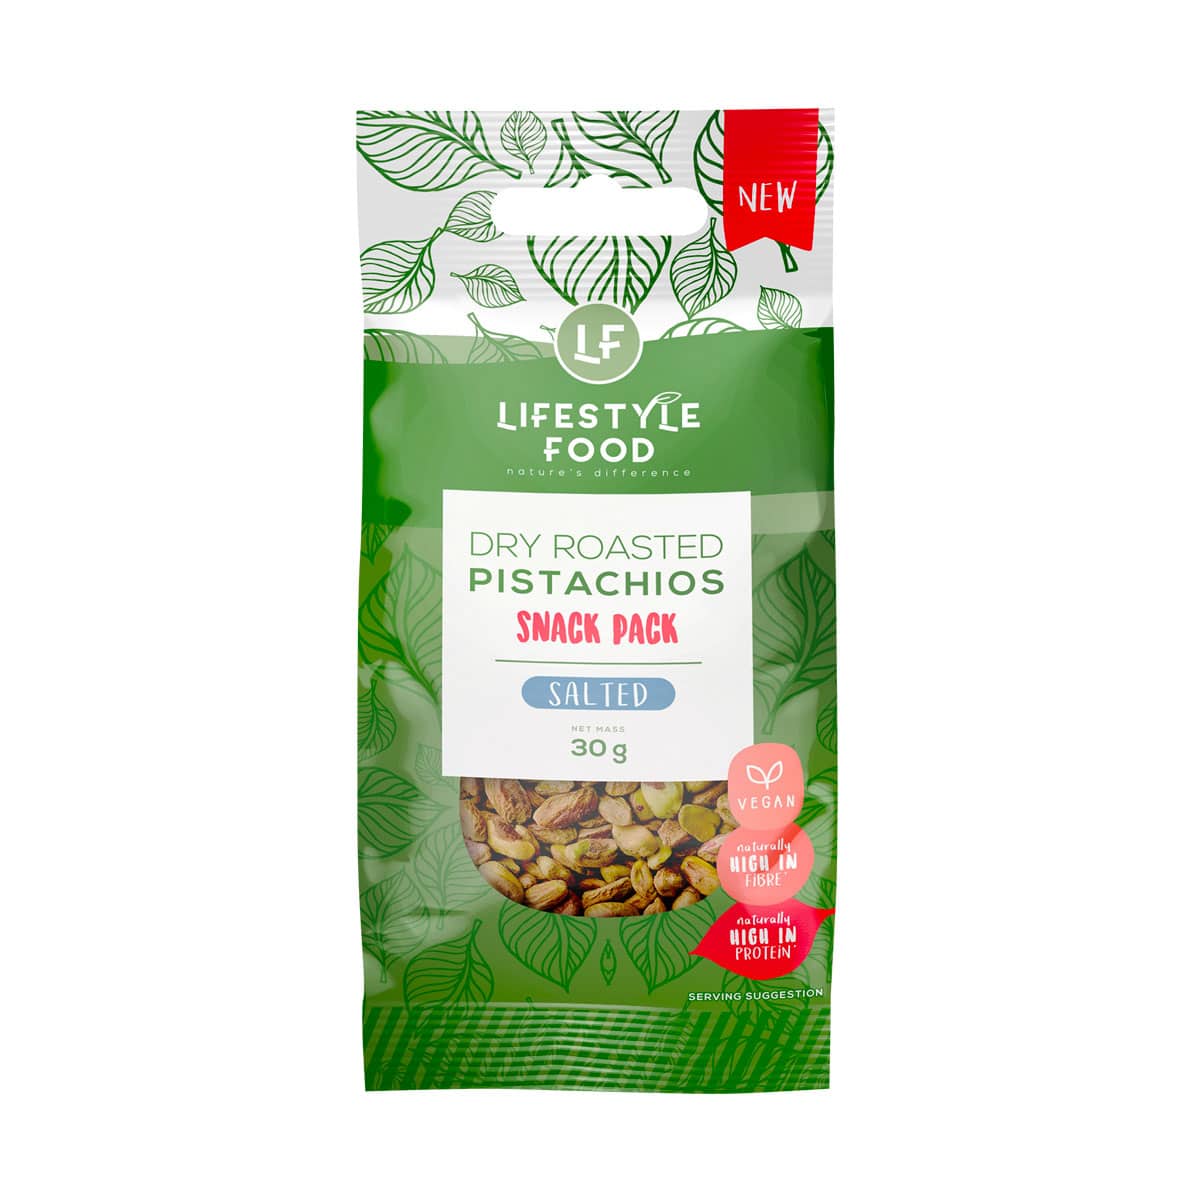 Lifestyle Food Dry Roasted Pistachios Snack Pack Salted - 30g